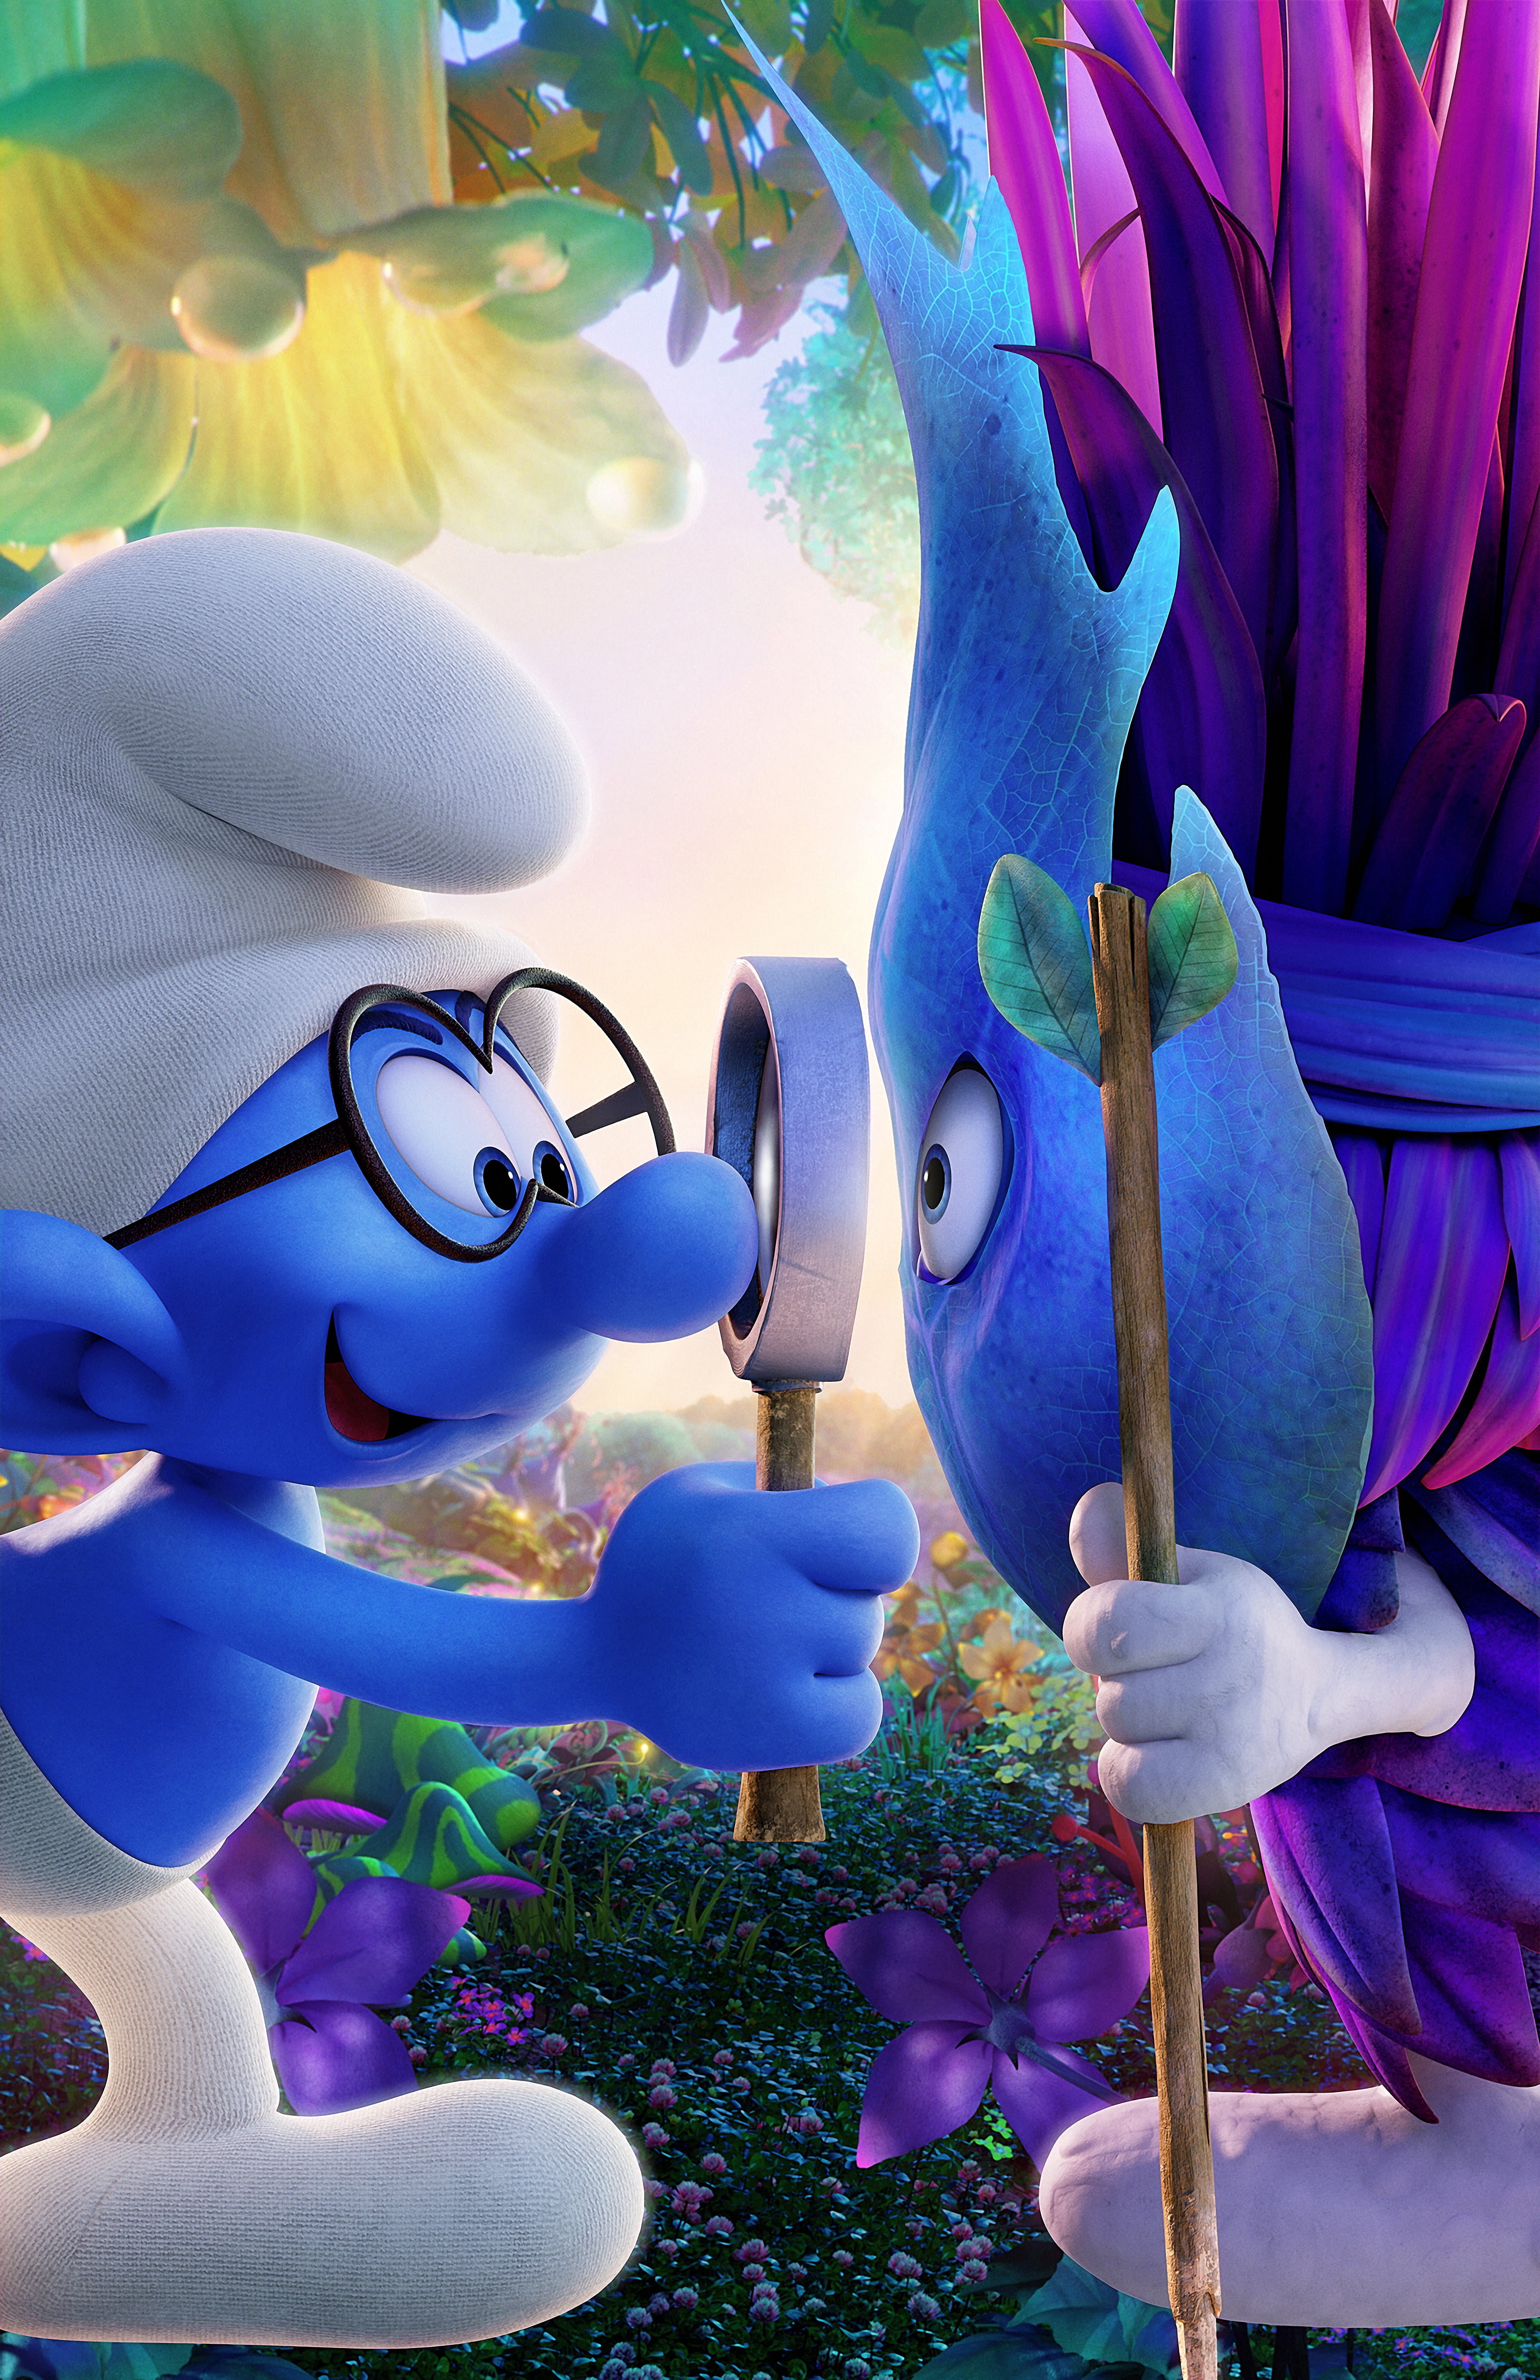 Smurf Hd Wallpaper For Android , HD Wallpaper & Backgrounds